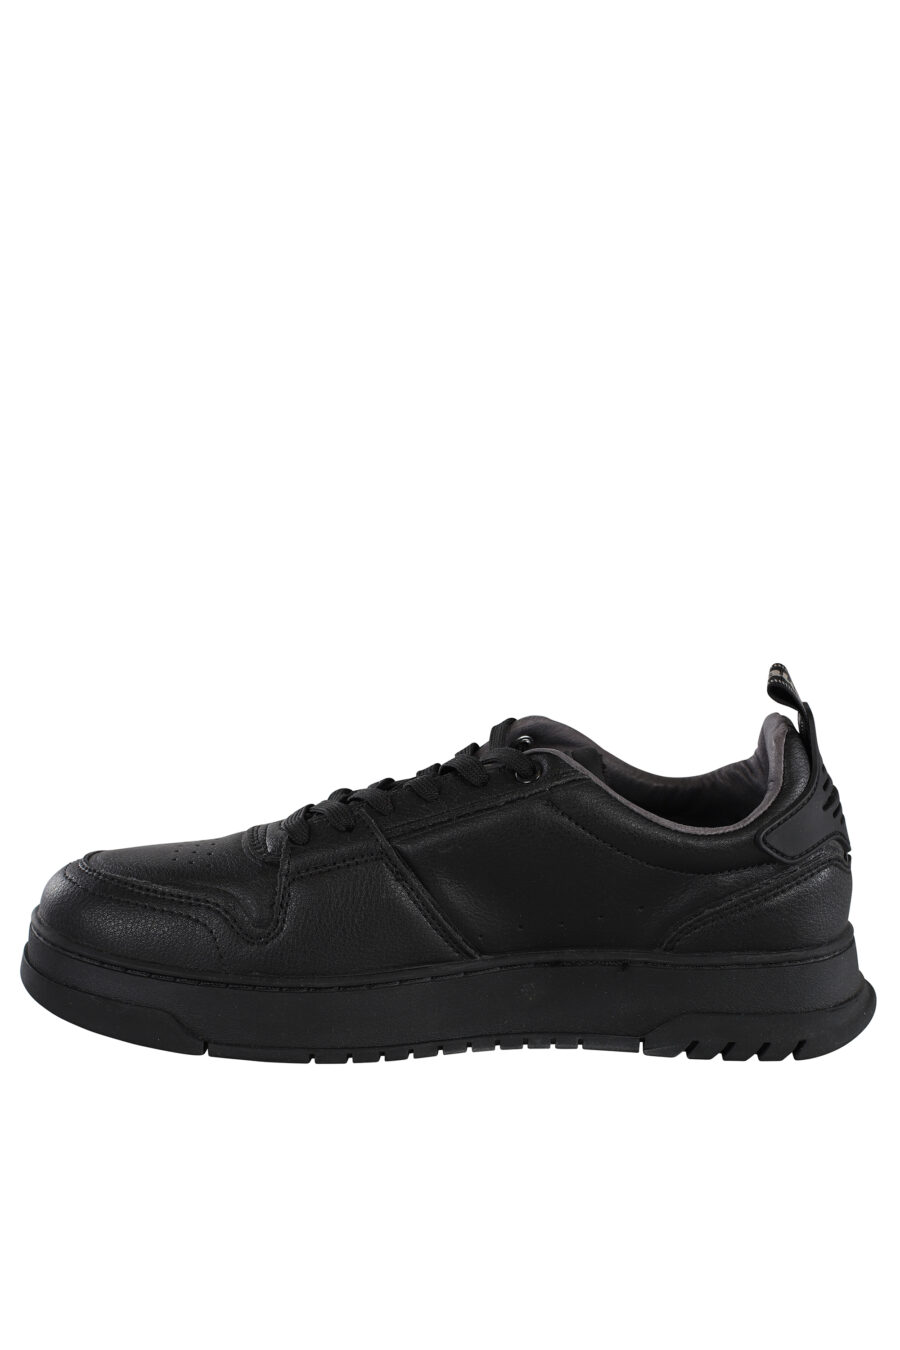 Trainers "harper" black leather with logo - IMG 6831